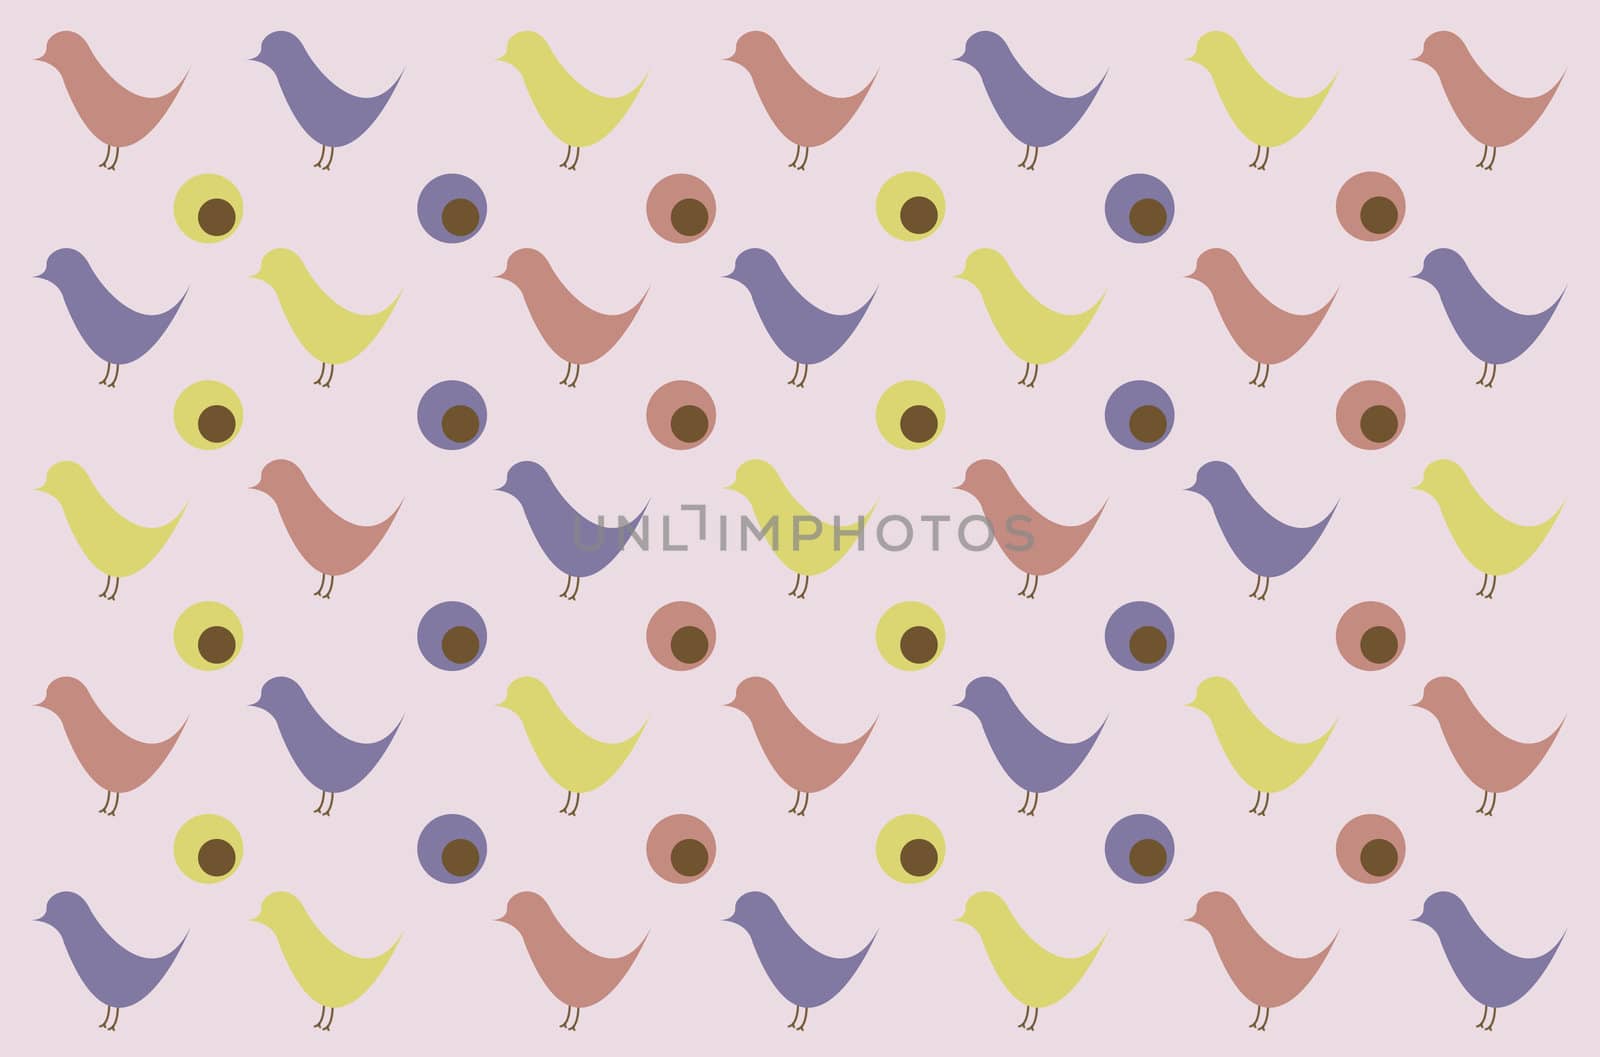 Retro bird pattern for background by ftlaudgirl